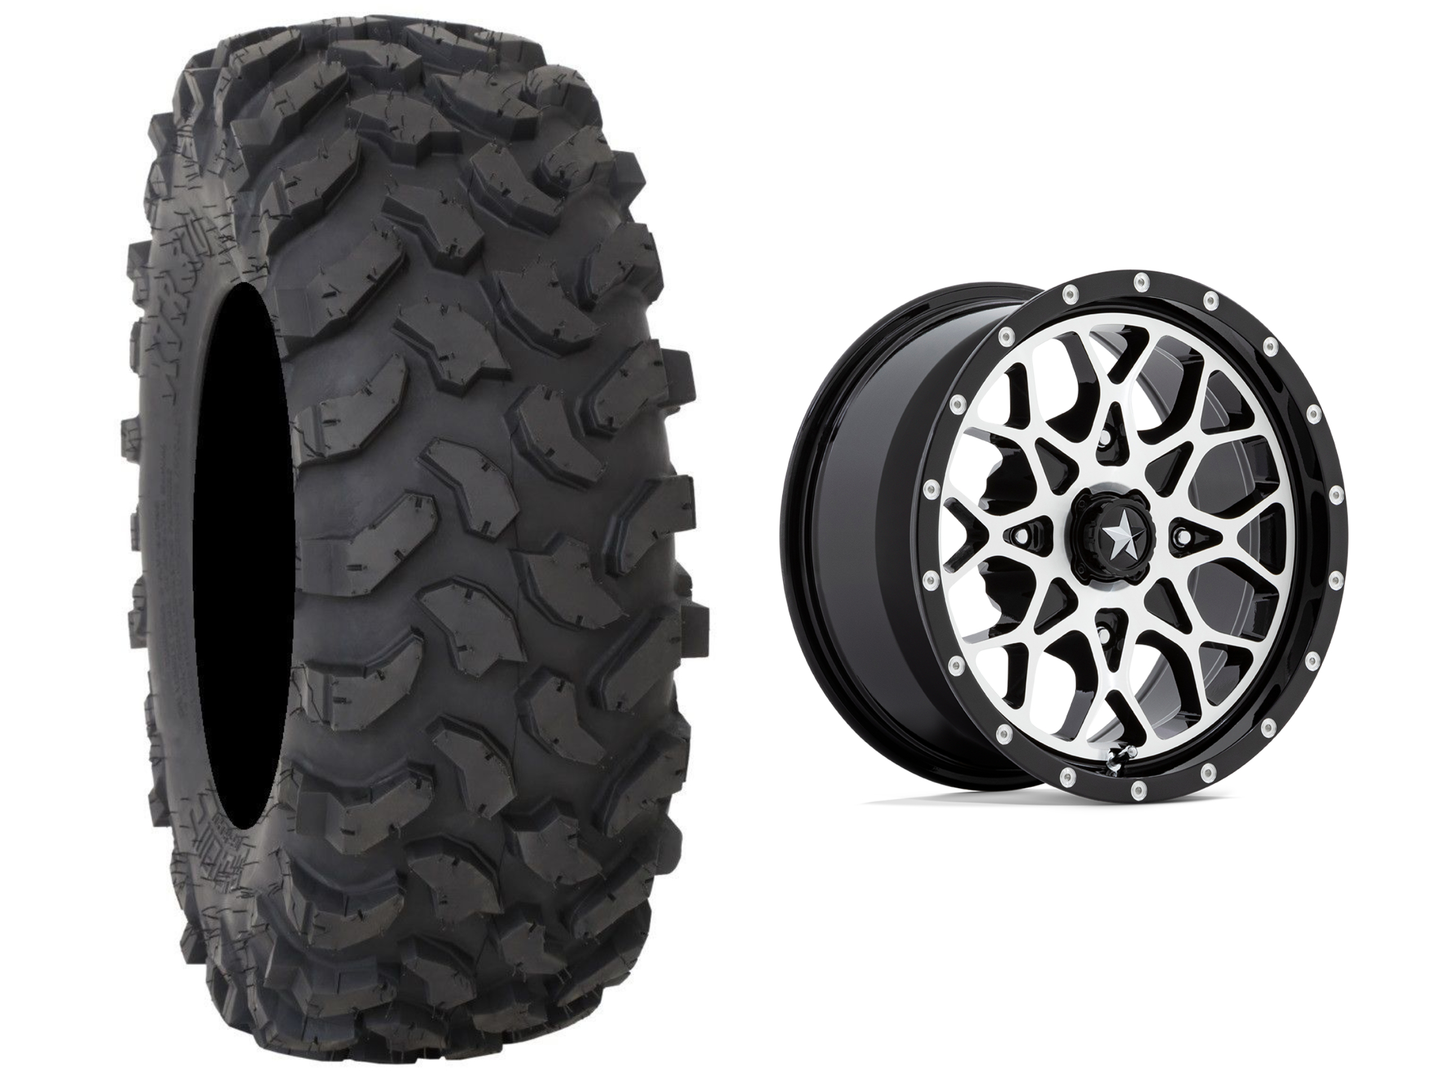 SYSTEM 3 XTR 370 | M45 (MACHINED) | WHEEL AND TIRE KIT